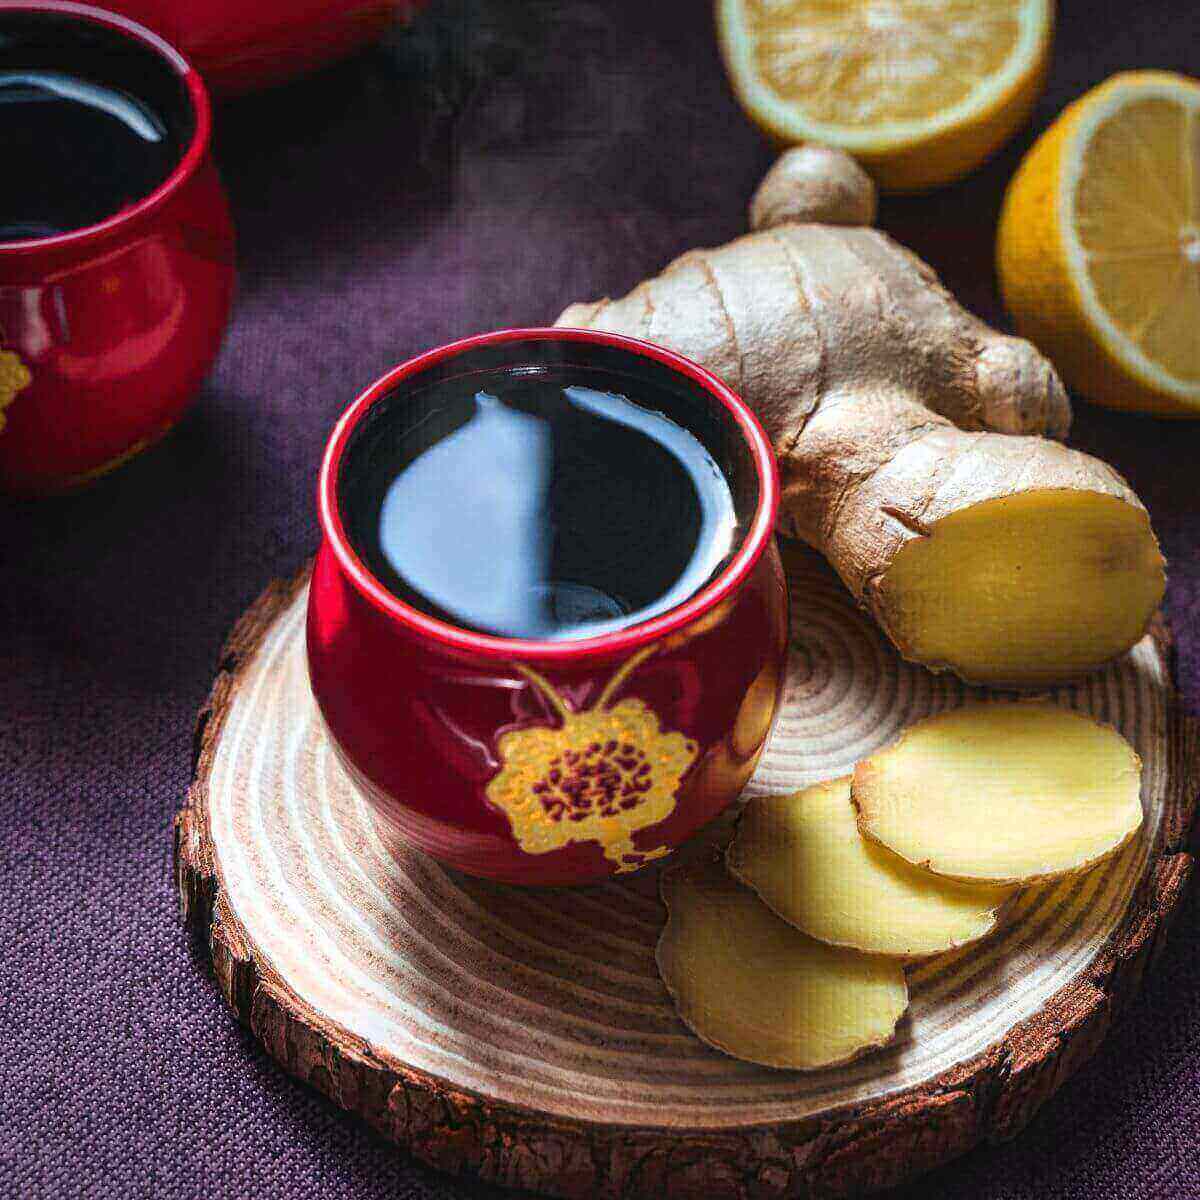 A red cup of tea is sitting on a round piece of wood. There are slices of ginger beside the cup with a cut lemon in the background